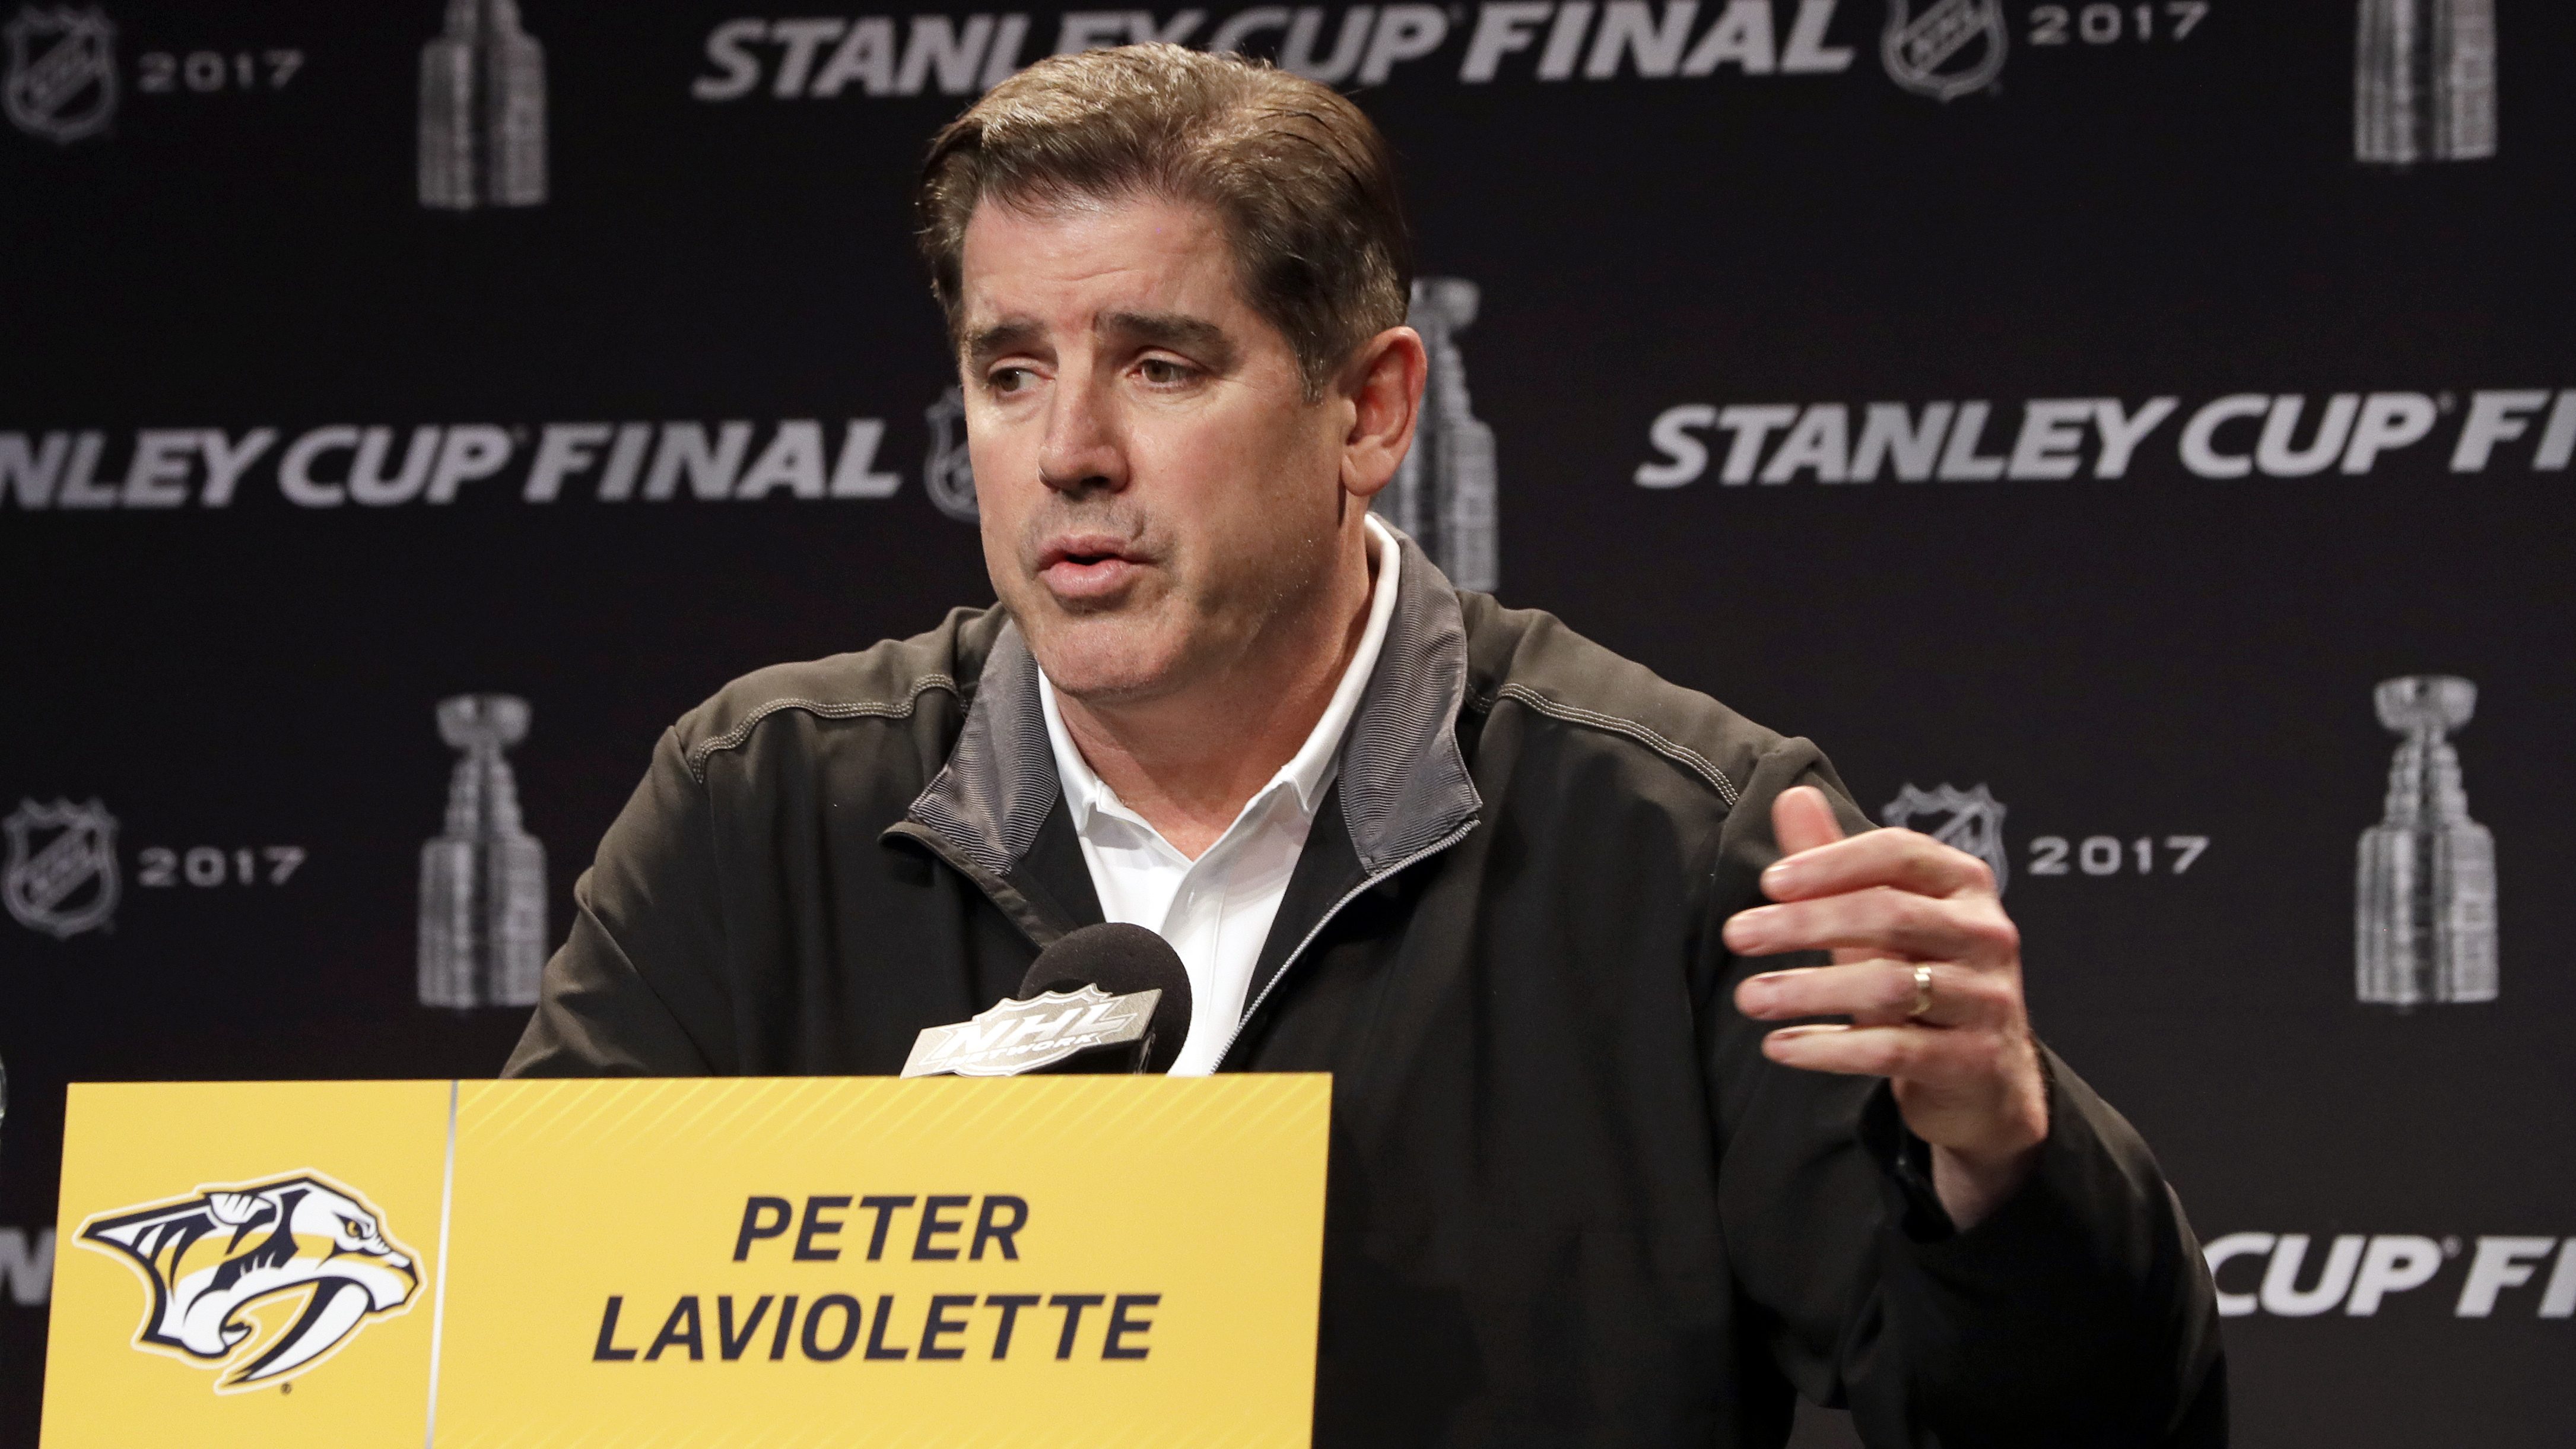 Peter Laviolette named coach of Washington Capitals BVM Sports US